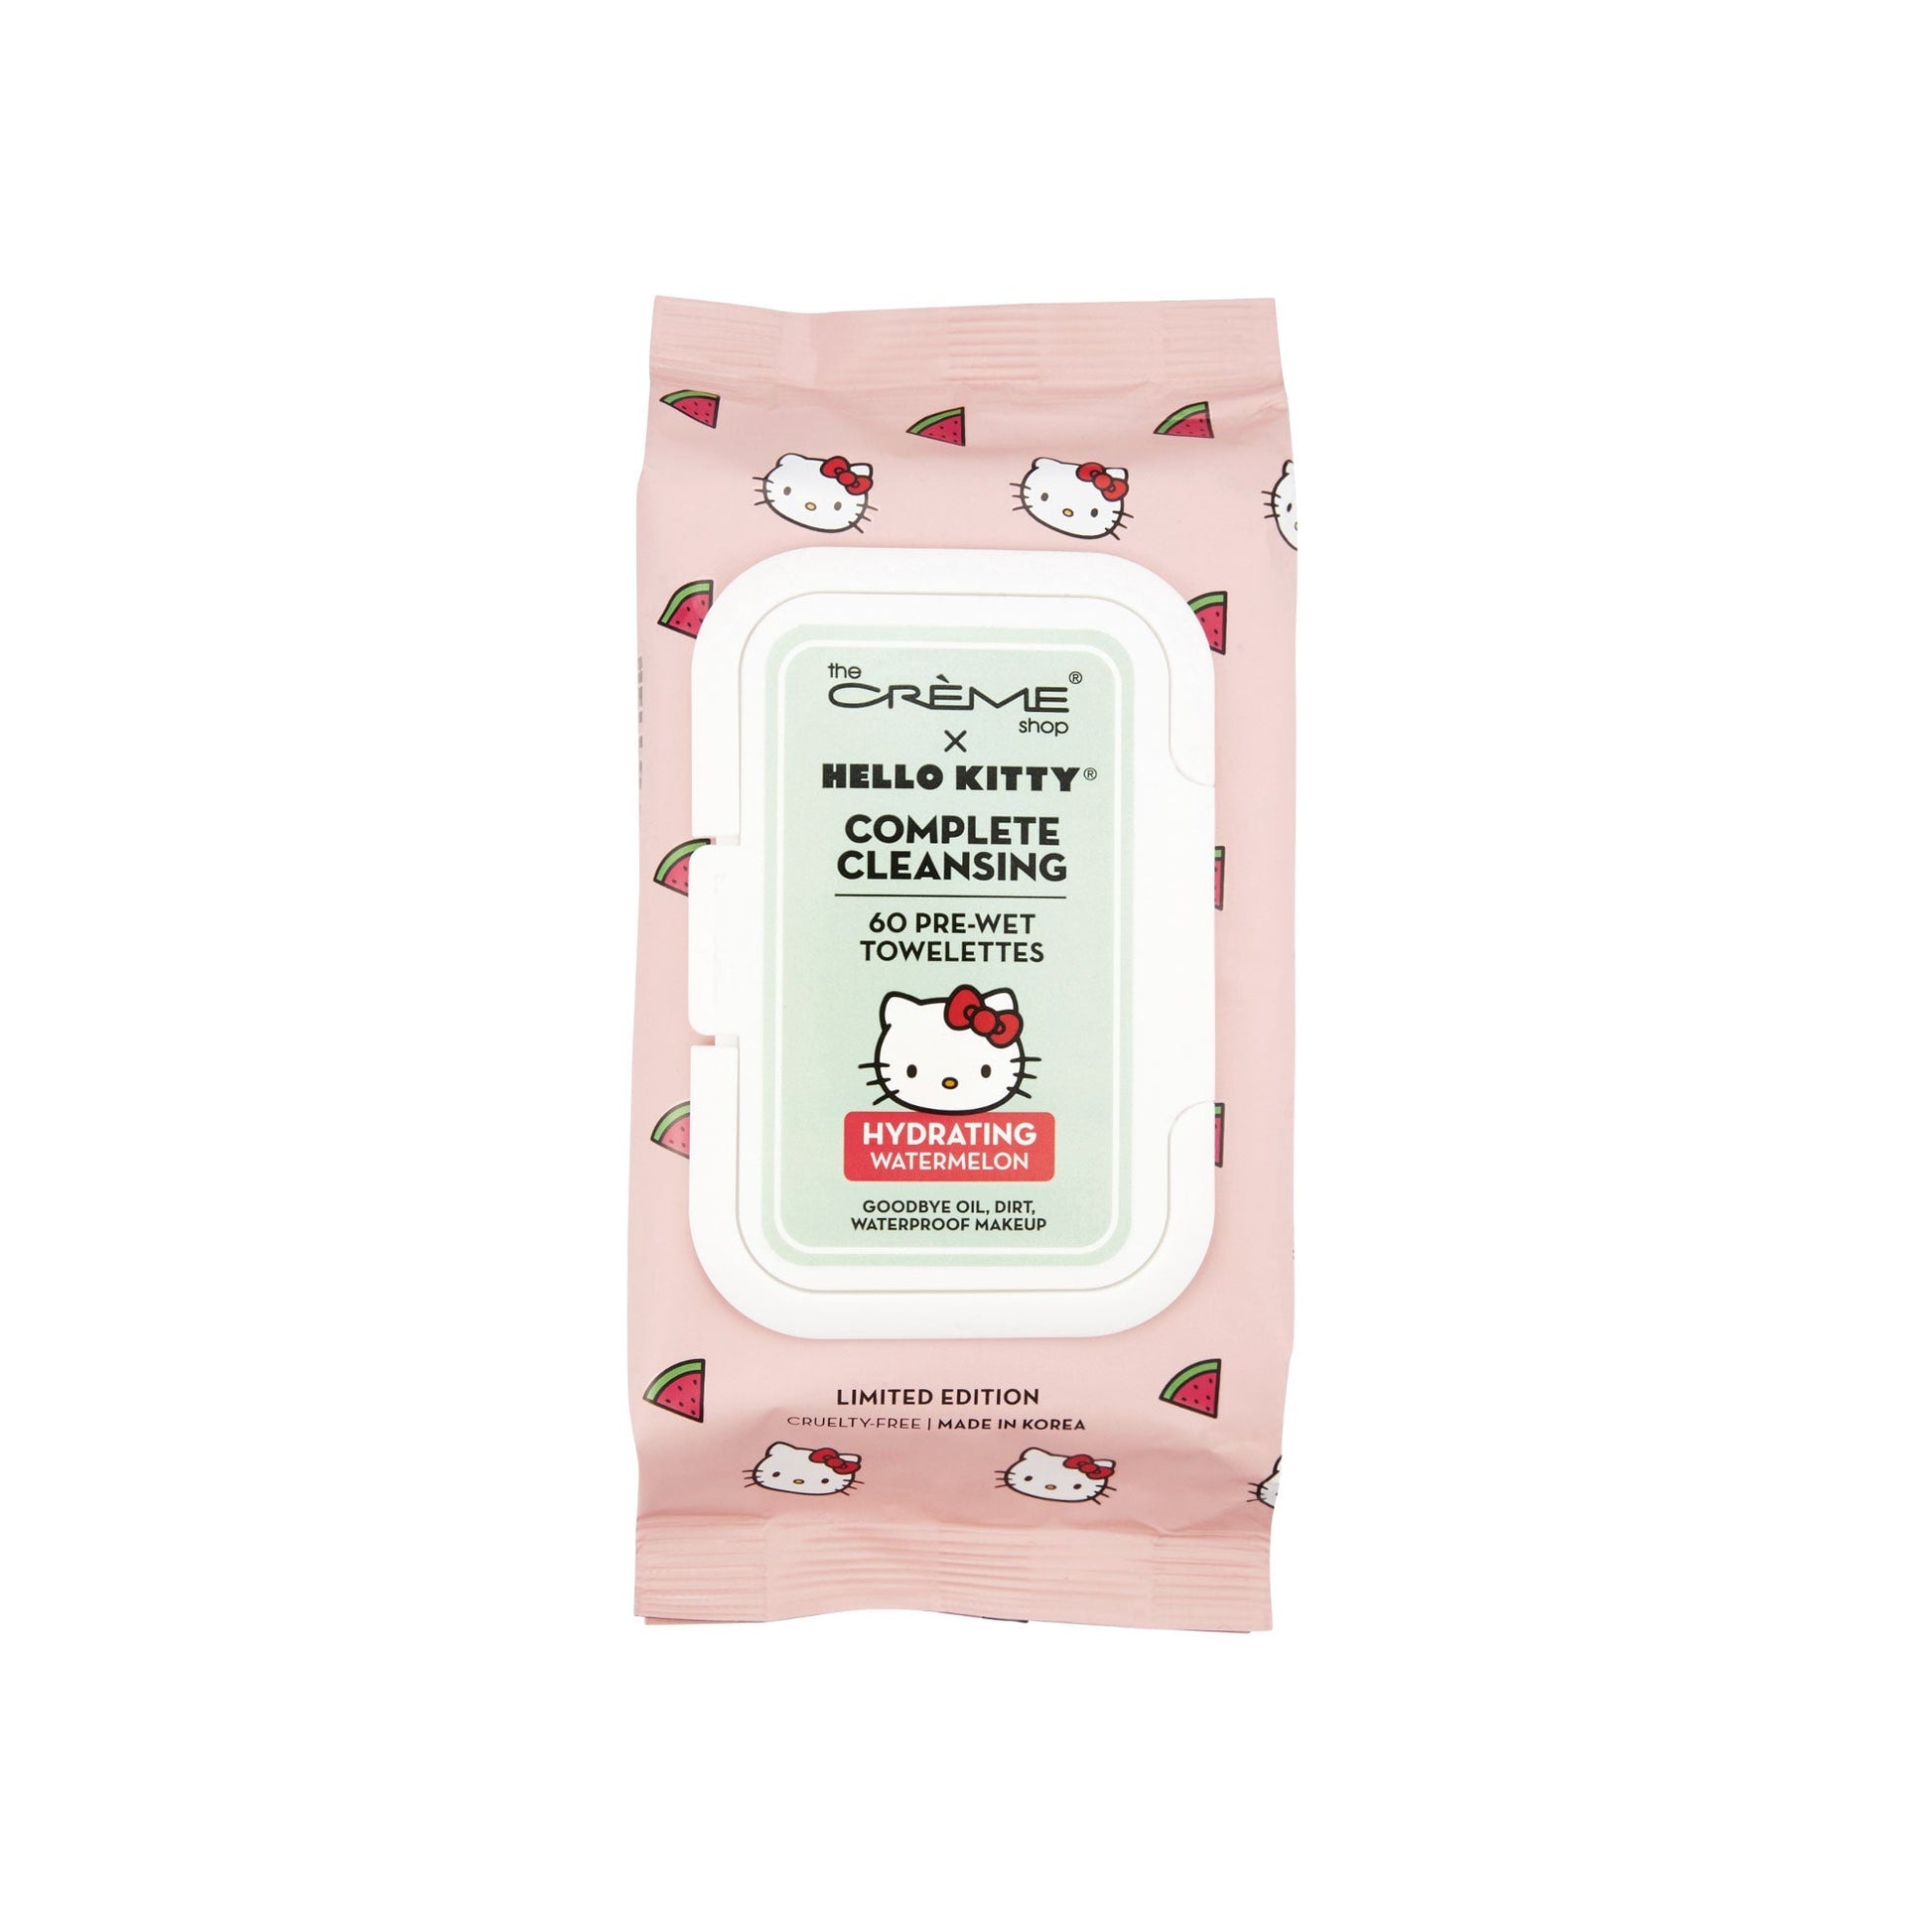 Hello Kitty 3-IN-1 Complete Cleansing Essence-Rich Towelettes - Hydrating Watermelon Towelettes The Crème Shop x Sanrio 